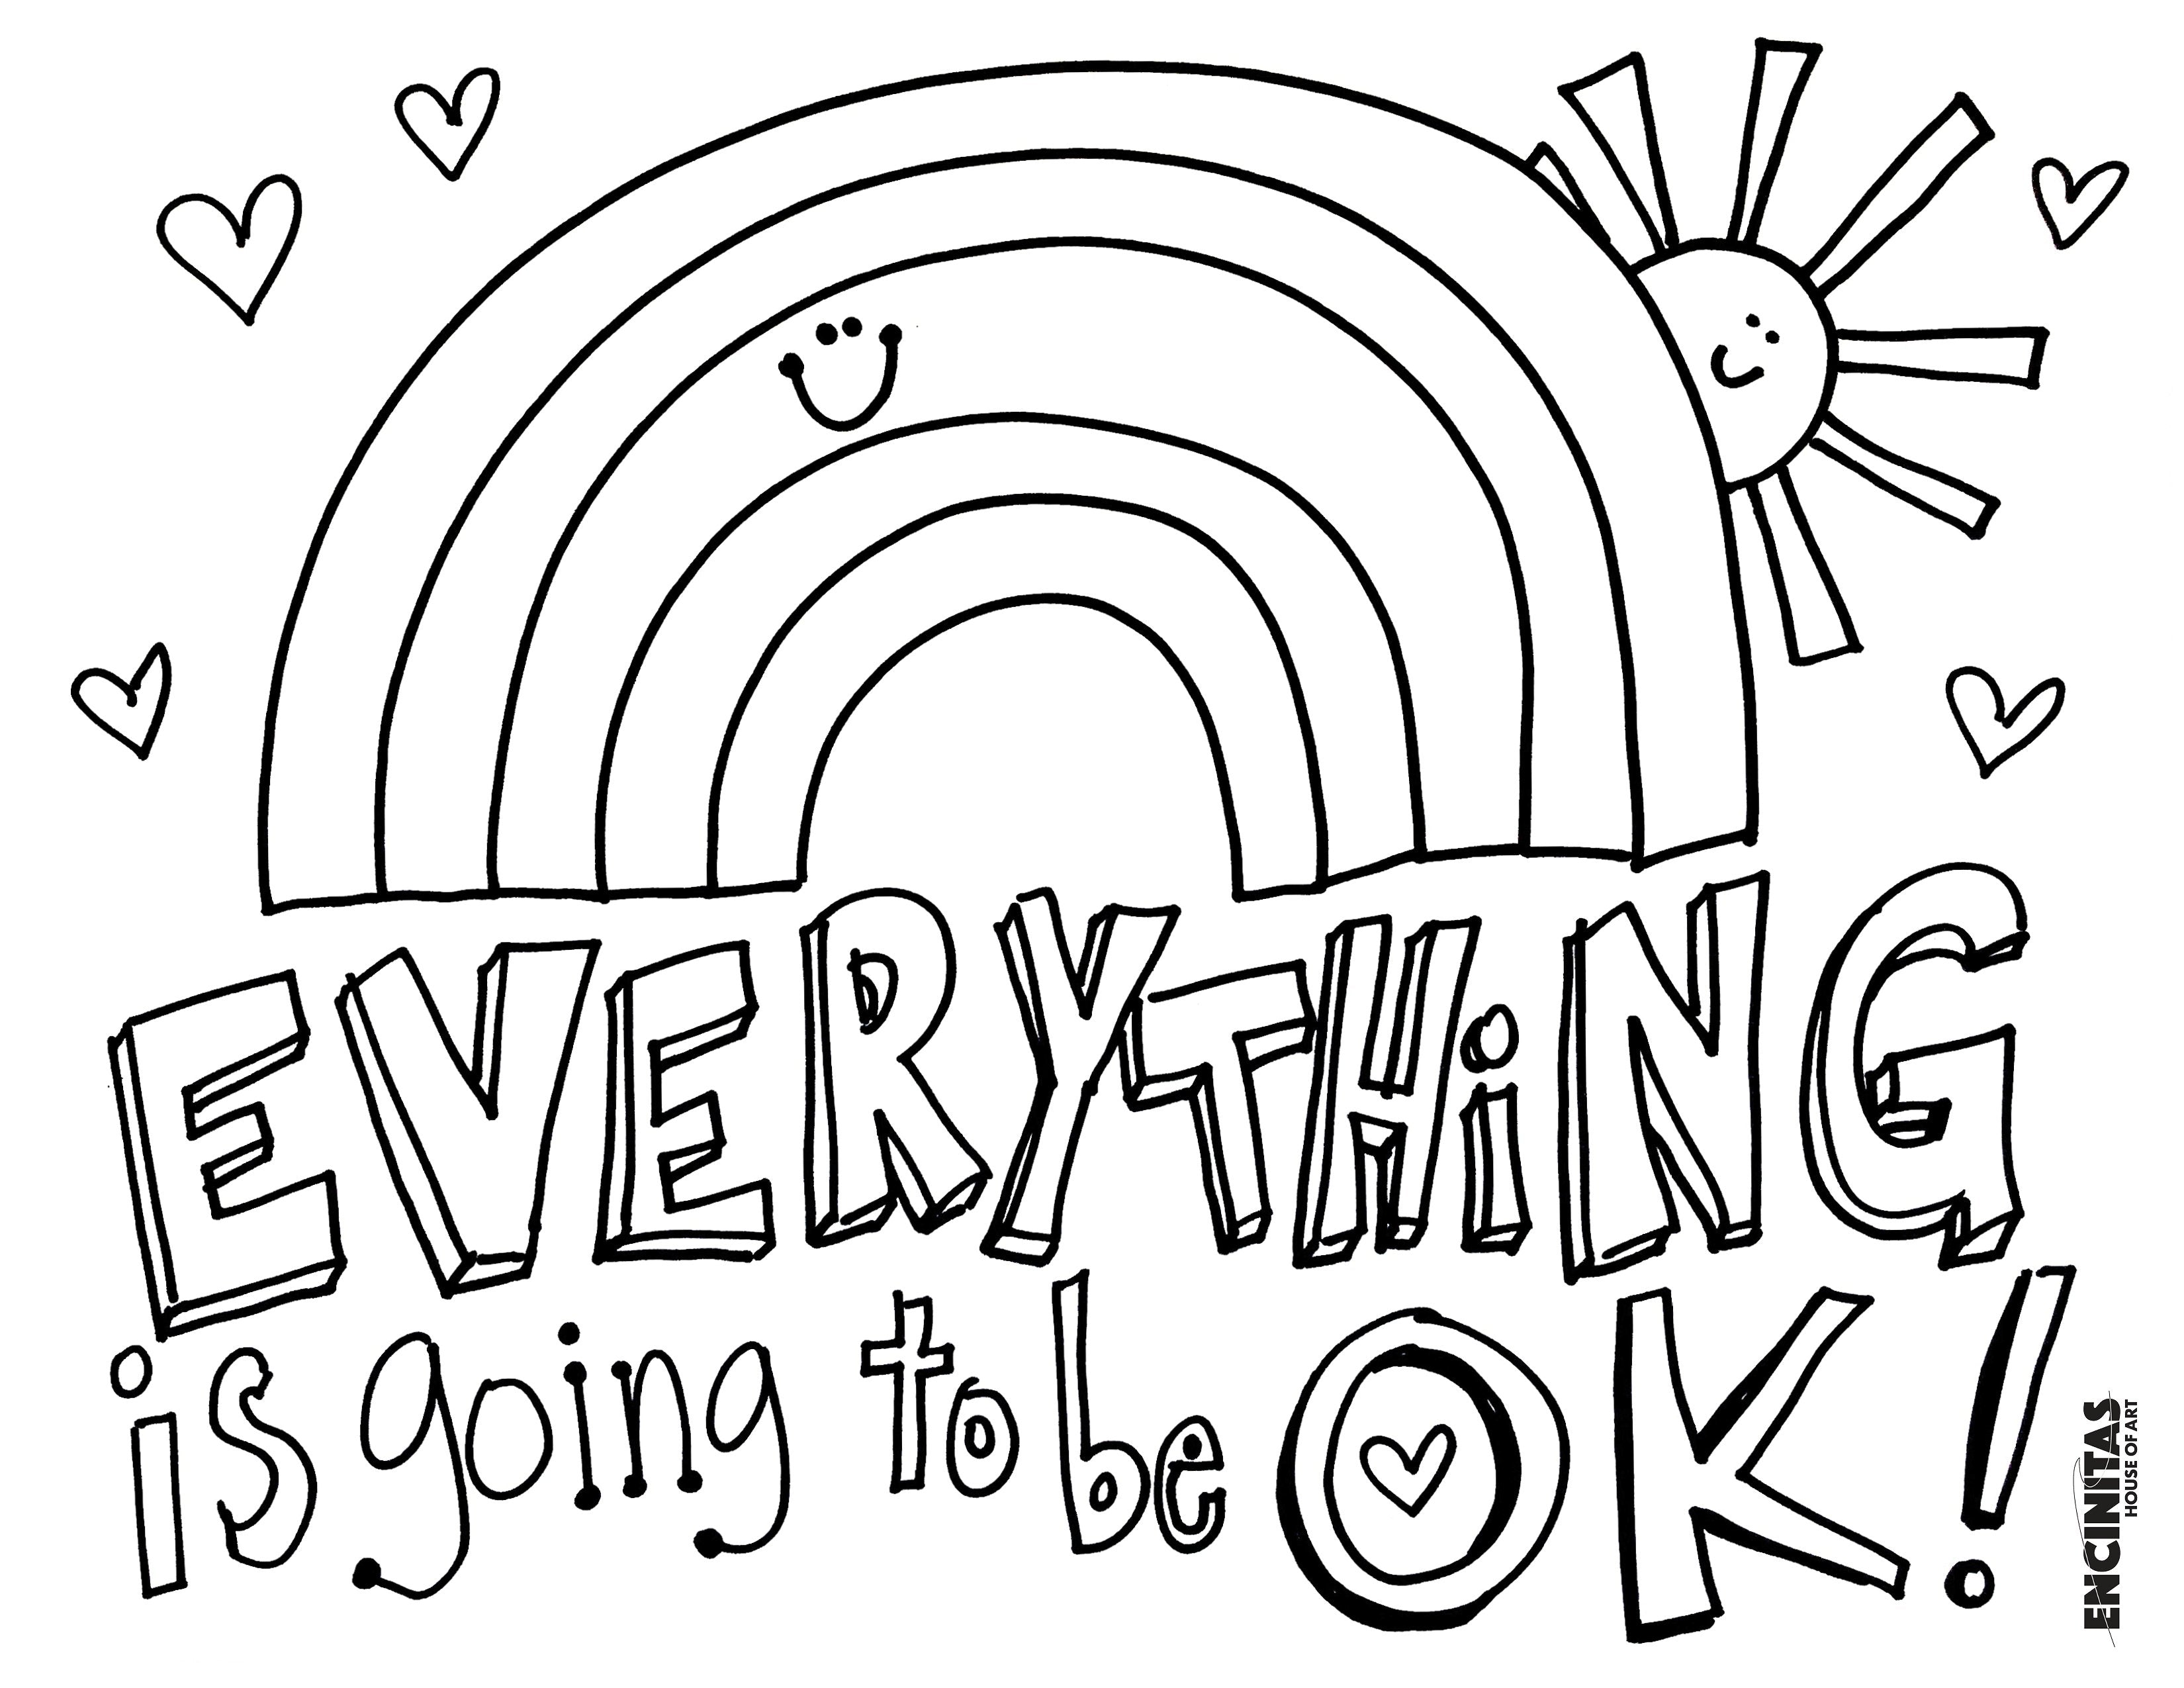 Everything is Going to Be OK Coloring Page (Horizontal) – Encinitas